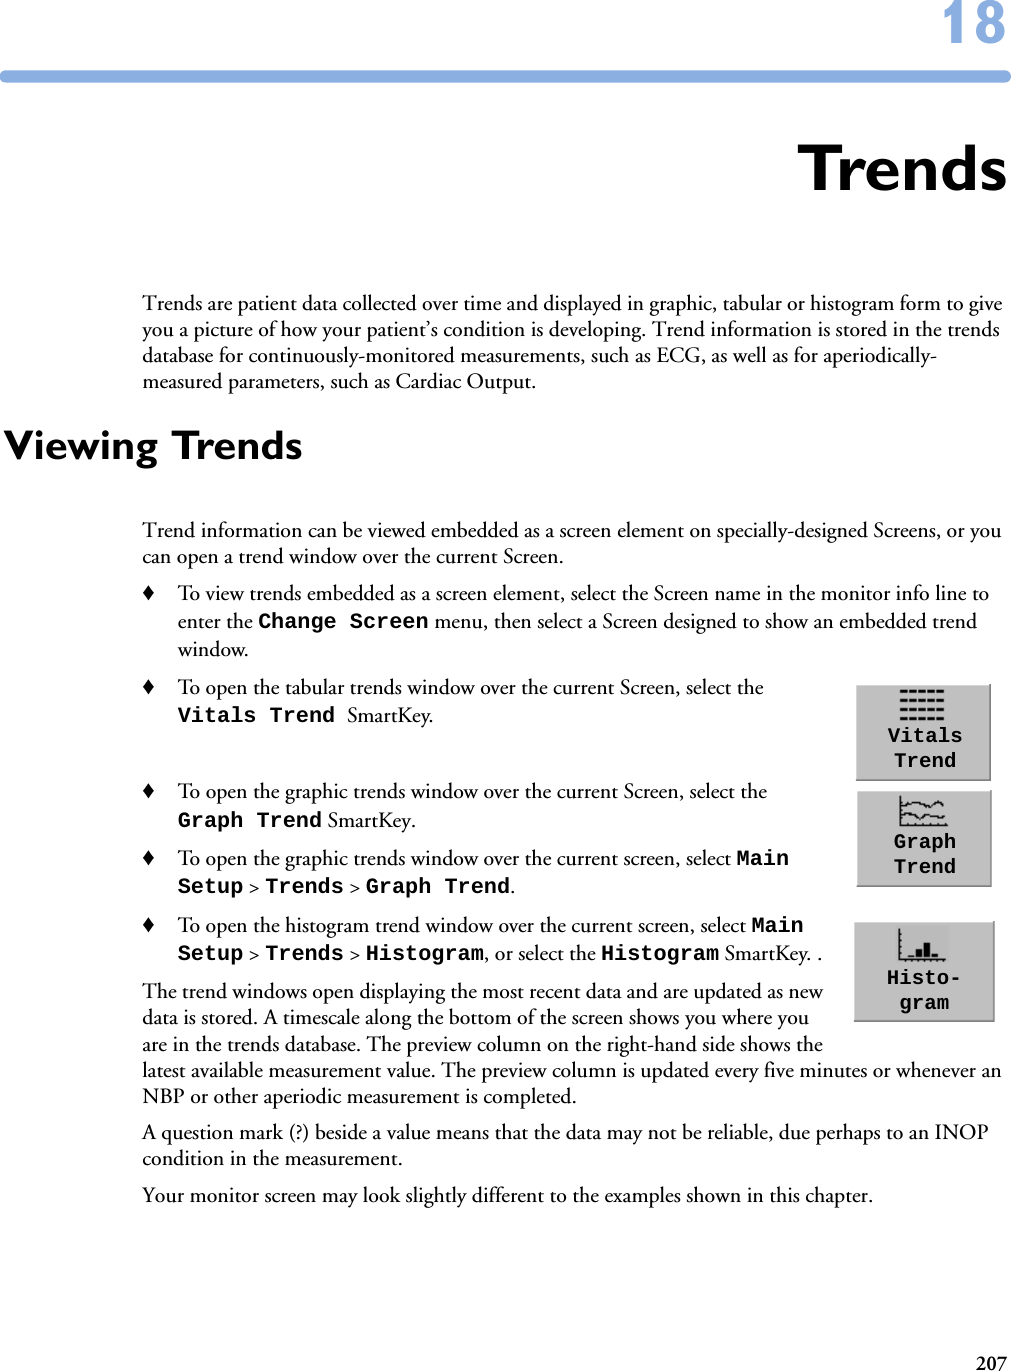 2071818TrendsTrends are patient data collected over time and displayed in graphic, tabular or histogram form to give you a picture of how your patient’s condition is developing. Trend information is stored in the trends database for continuously-monitored measurements, such as ECG, as well as for aperiodically-measured parameters, such as Cardiac Output.Viewing TrendsTrend information can be viewed embedded as a screen element on specially-designed Screens, or you can open a trend window over the current Screen. ♦To view trends embedded as a screen element, select the Screen name in the monitor info line to enter the Change Screen menu, then select a Screen designed to show an embedded trend window. ♦To open the tabular trends window over the current Screen, select the Vitals Trend SmartKey. ♦To open the graphic trends window over the current Screen, select the Graph Trend SmartKey.♦To open the graphic trends window over the current screen, select Main Setup &gt; Trends &gt; Graph Trend.♦To open the histogram trend window over the current screen, select Main Setup &gt; Trends &gt; Histogram, or select the Histogram SmartKey. .The trend windows open displaying the most recent data and are updated as new data is stored. A timescale along the bottom of the screen shows you where you are in the trends database. The preview column on the right-hand side shows the latest available measurement value. The preview column is updated every five minutes or whenever an NBP or other aperiodic measurement is completed. A question mark (?) beside a value means that the data may not be reliable, due perhaps to an INOP condition in the measurement. Your monitor screen may look slightly different to the examples shown in this chapter.Vitals TrendGraph TrendHisto-gram